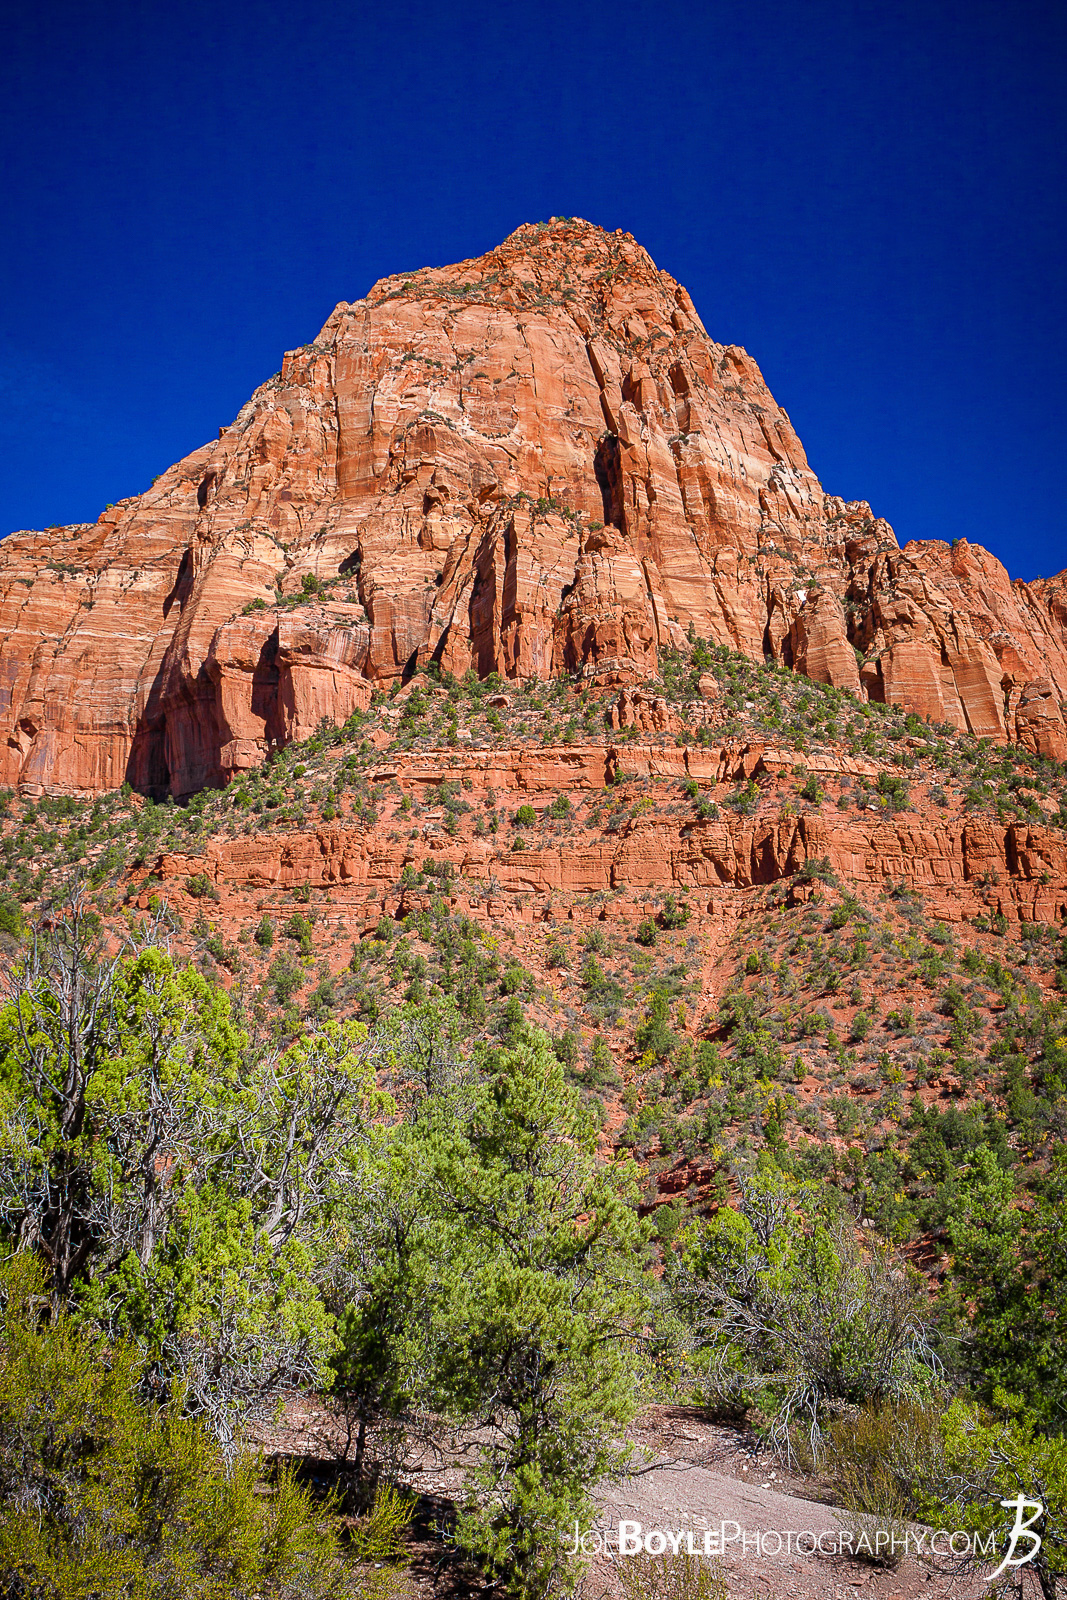  This is a photo near the start of the trailhead for the Kolob Canyon Trail in Zion National Park. The trail was a beautiful and pleasant 14 mile round trip. My hiking buddy Caleb and I hiked it together and saw the Koleb Arch near the half way point. Interestingly, I noticed the terrain changed quite a bit as we descened. It started off as I expected,... rocky. Their were large sections, however that were quite sandy. That slowed us down a little bit, but not too much. I just didn't expect it! Here are some links to more articles and and hiking info about the Koleb Canyon Trail, Koleb Arch, other hiking trails in Zion National Park and a Map of Zion National Park. 